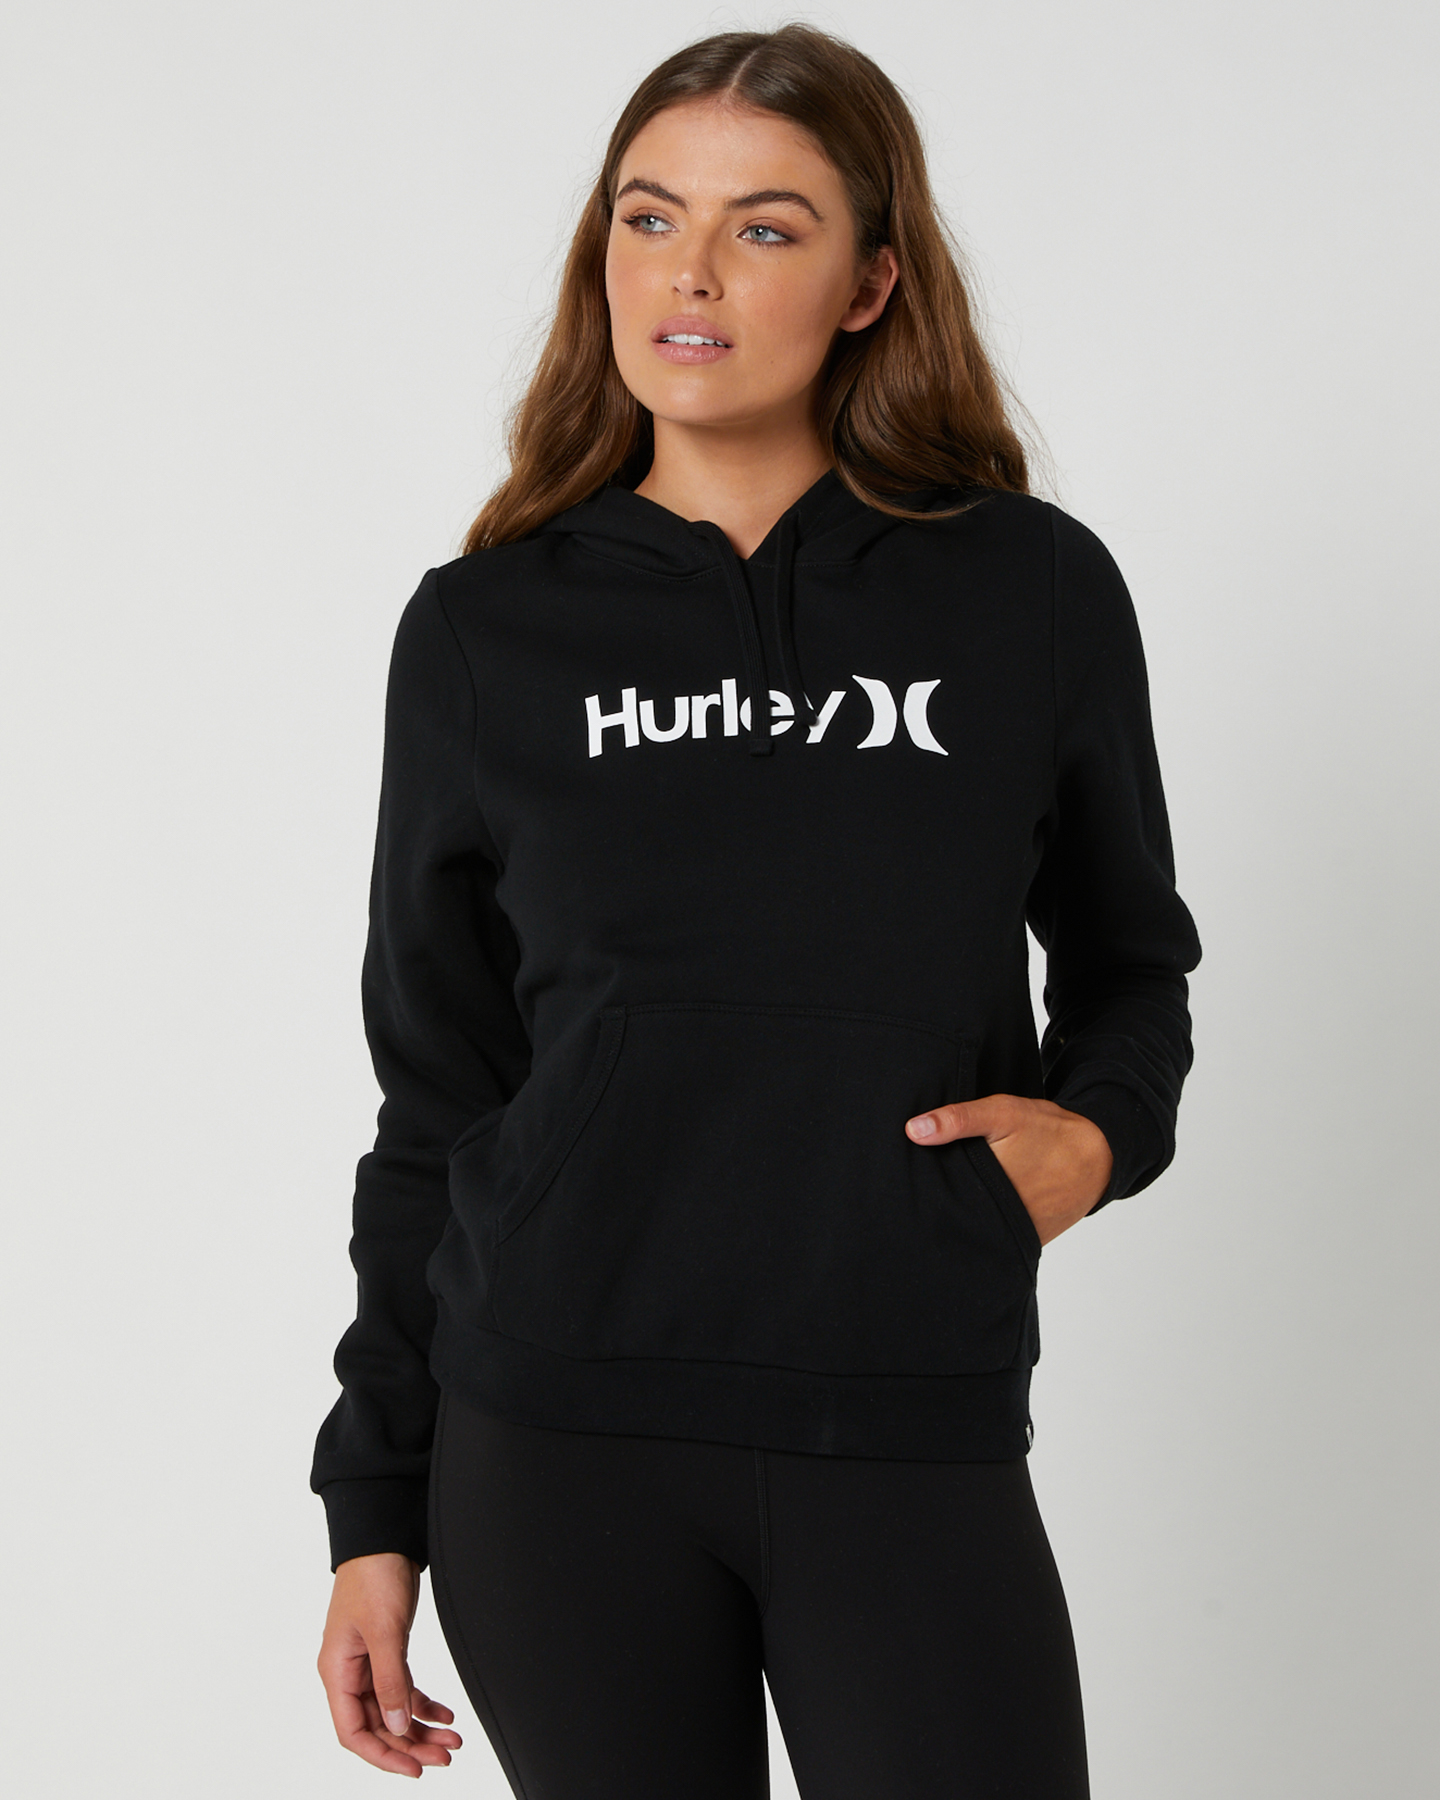 antwoord Azië dialect Hurley Oao Core Hoodie - Black | SurfStitch